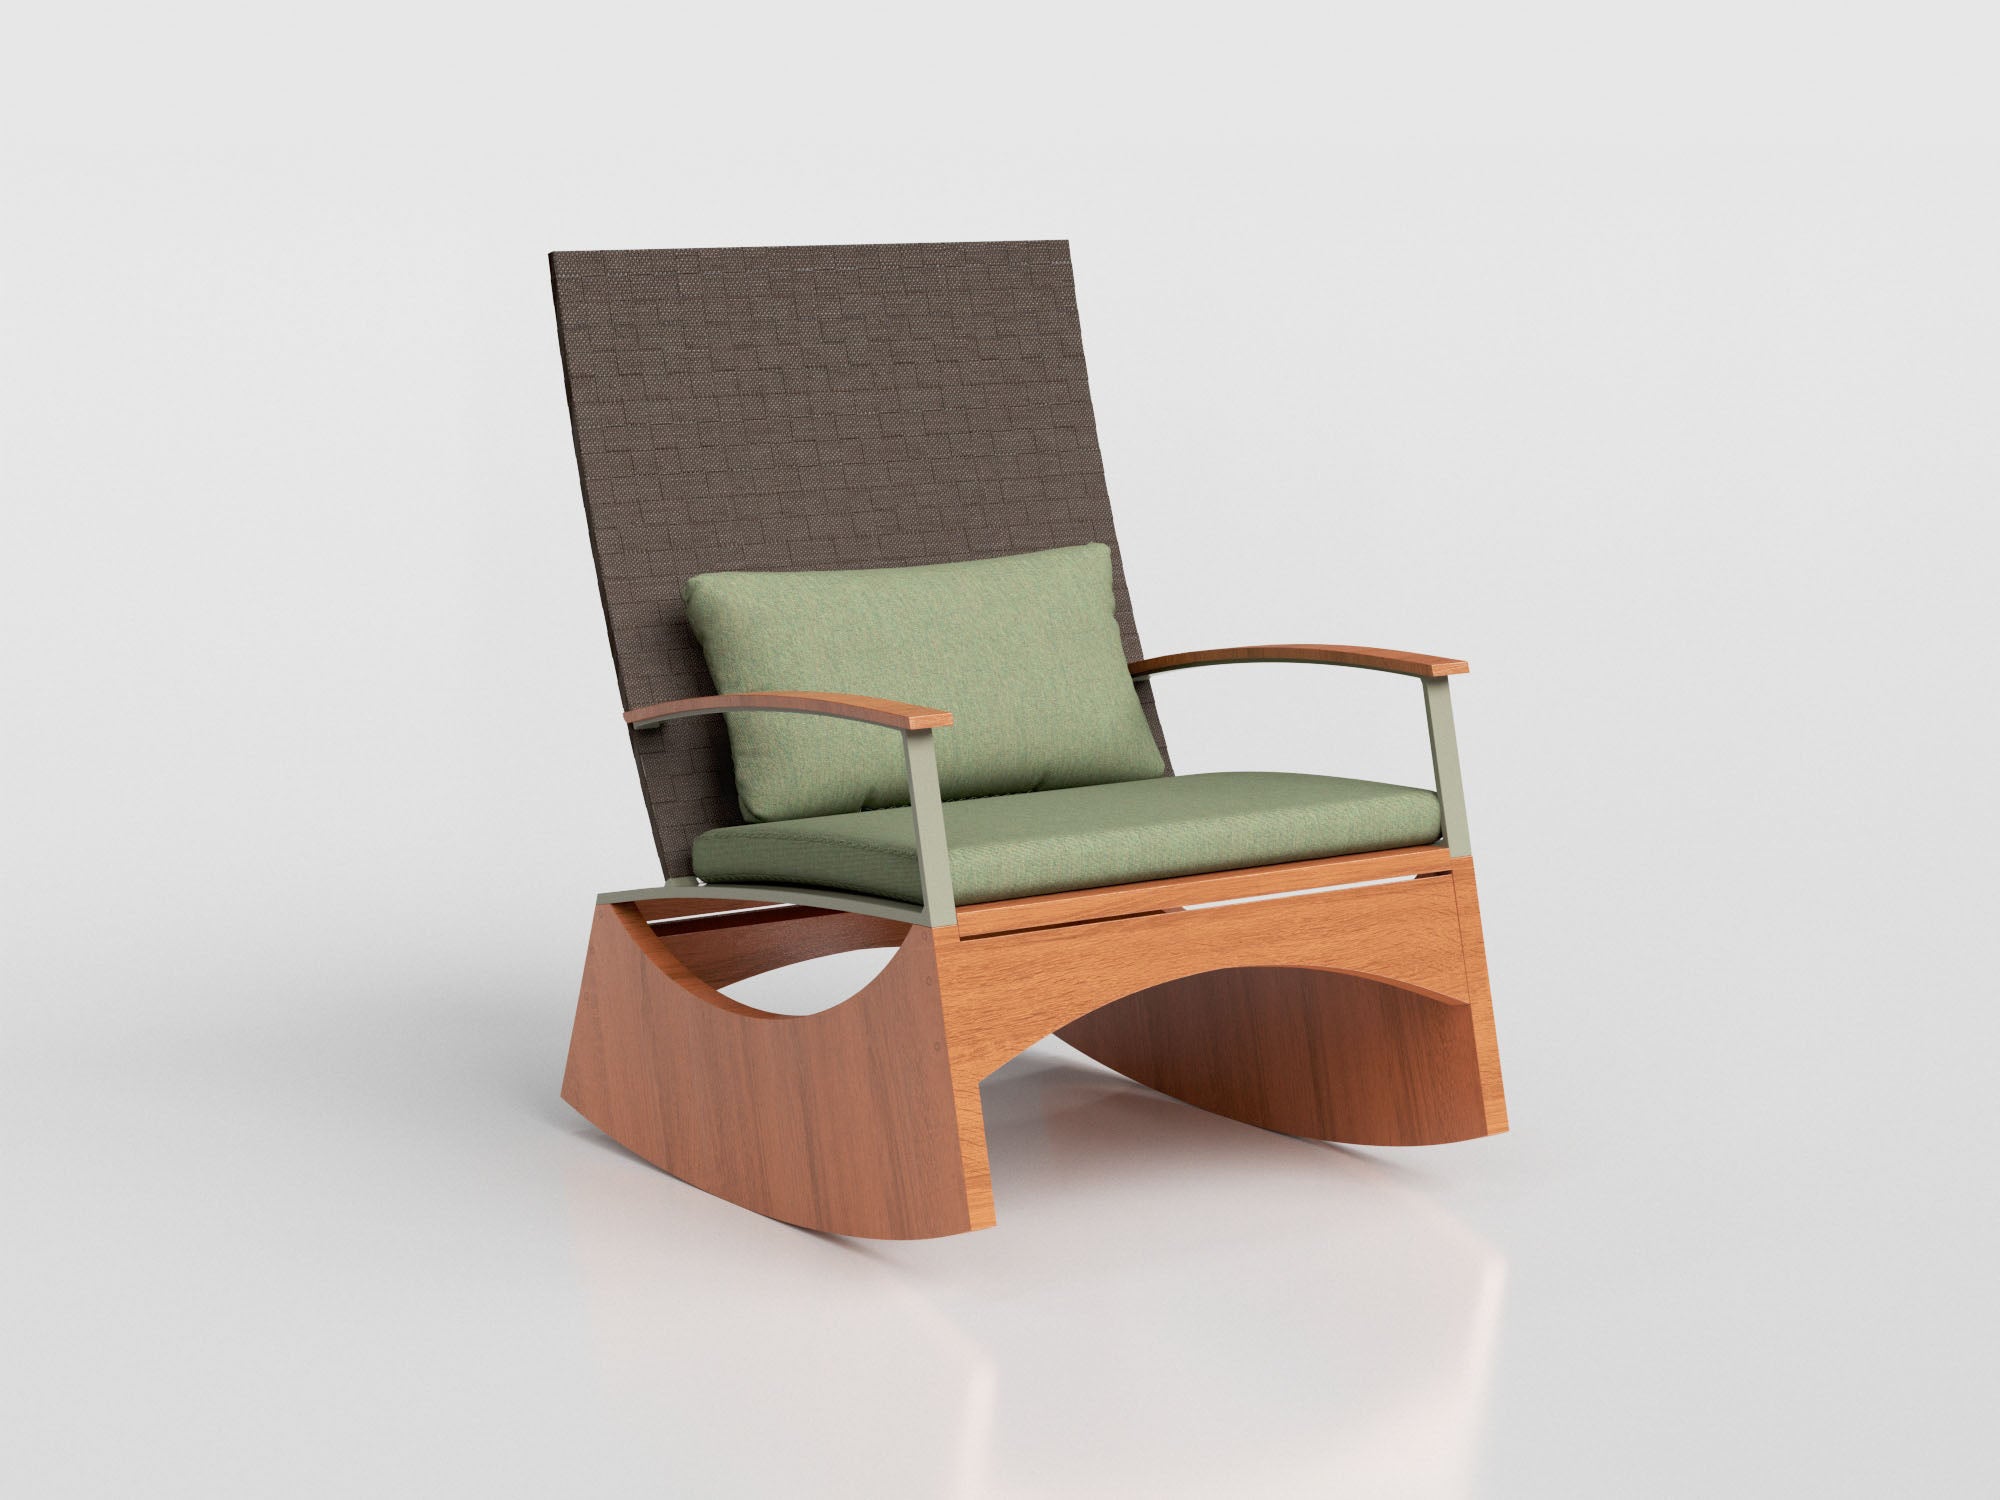 Ioio Rocking Chair Standard with aluminum and wood estruture, waven in sling finishing and includes seat and back cushions upholstery, designed by Manuel Bandeira.